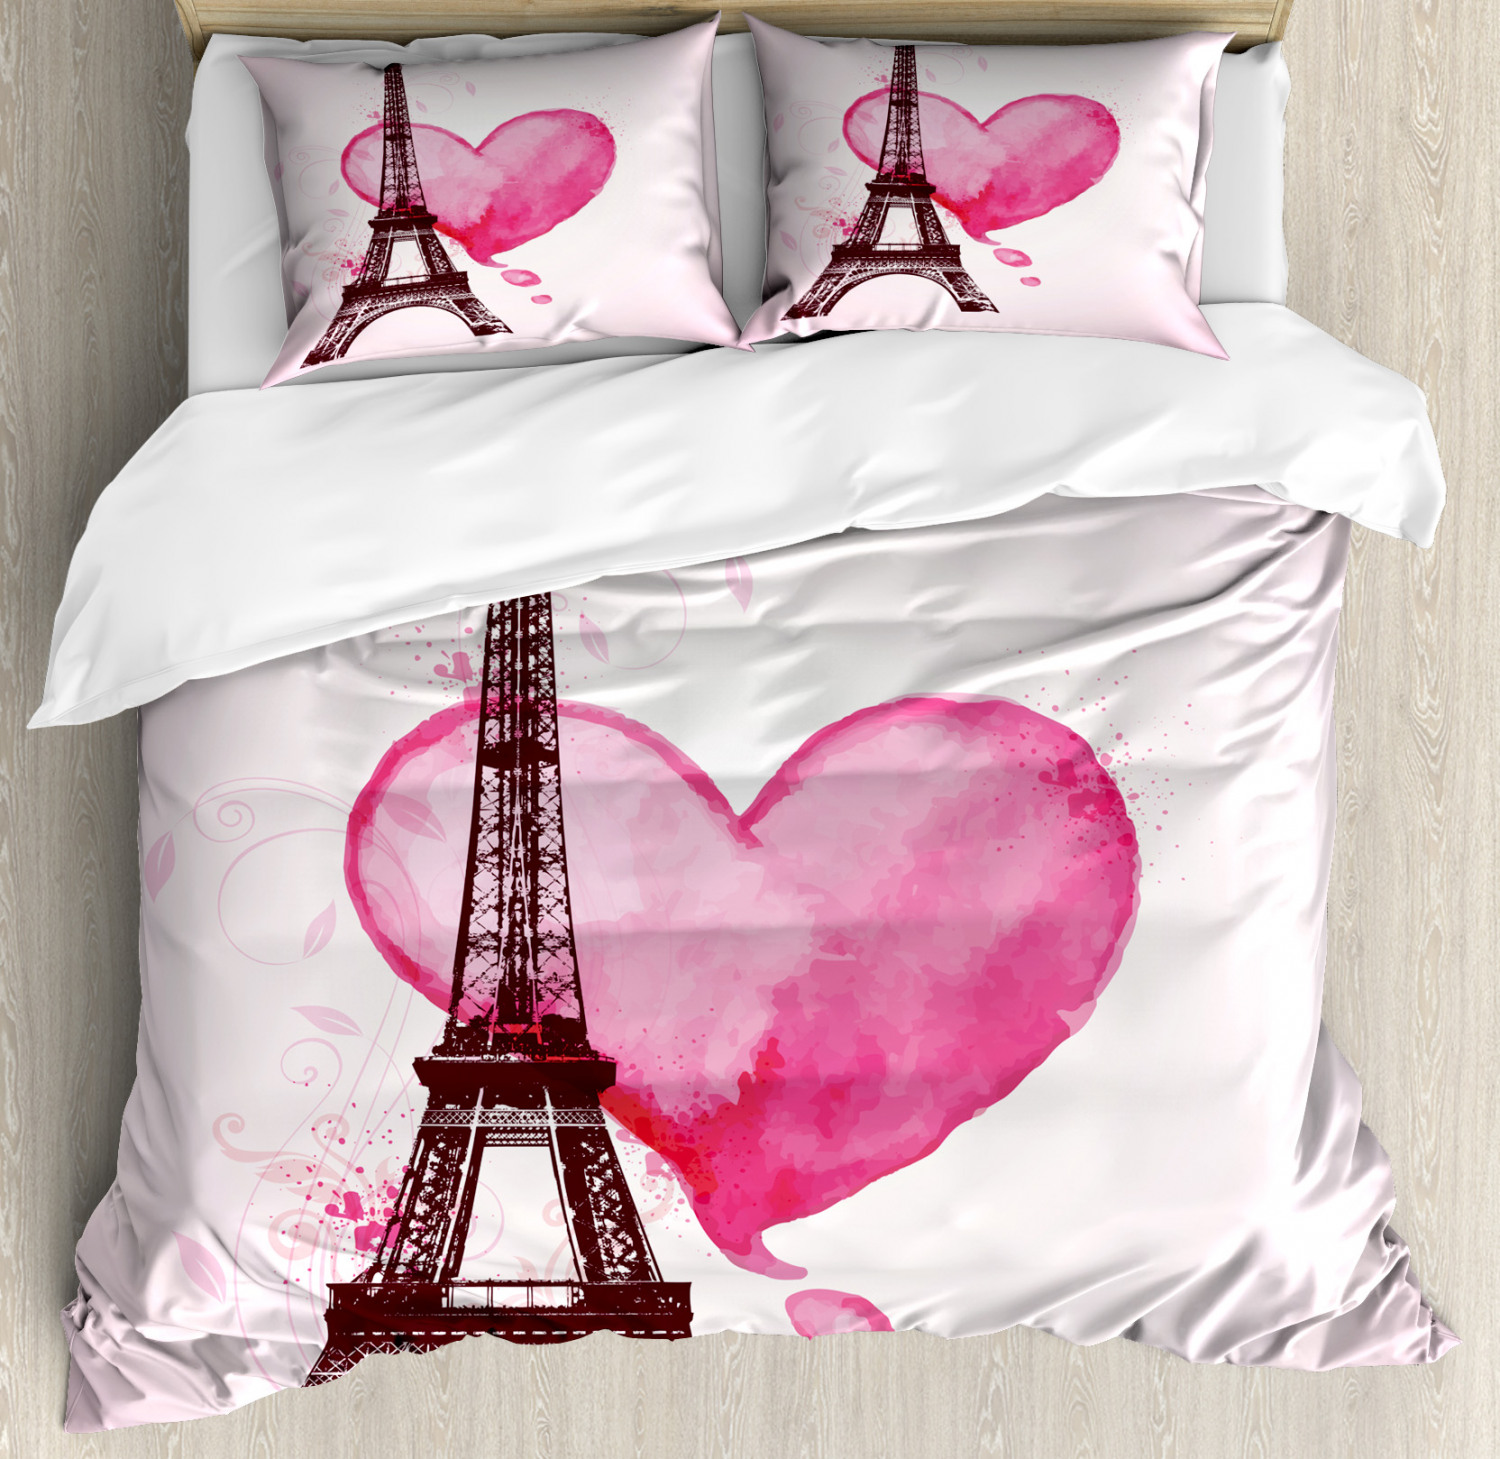 administración persona que practica jogging Frank Worthley Eiffel Tower Duvet Cover Set with Pillow Shams Romance Love Art Print | eBay